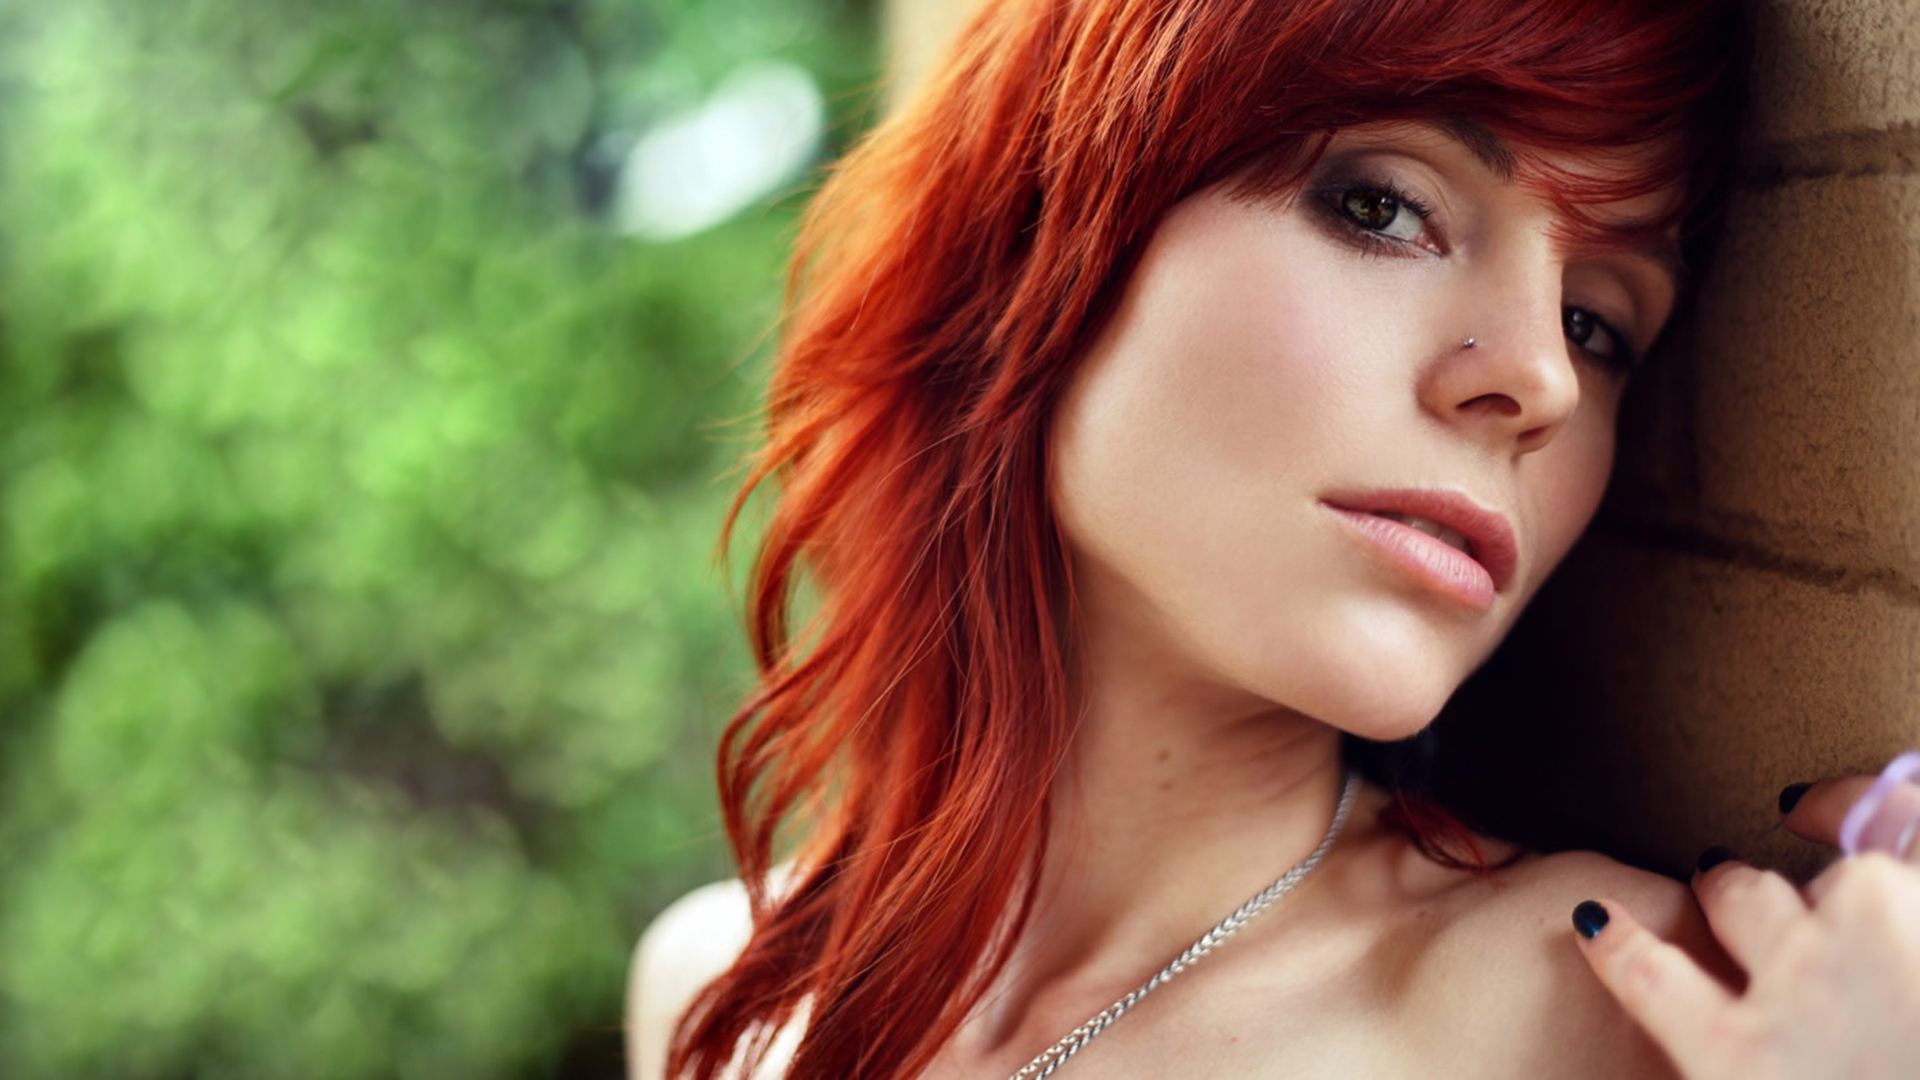 Free Download Redhead Wallpapers Hot Girls Wallpaper [1920x1080] For Your Desktop Mobile